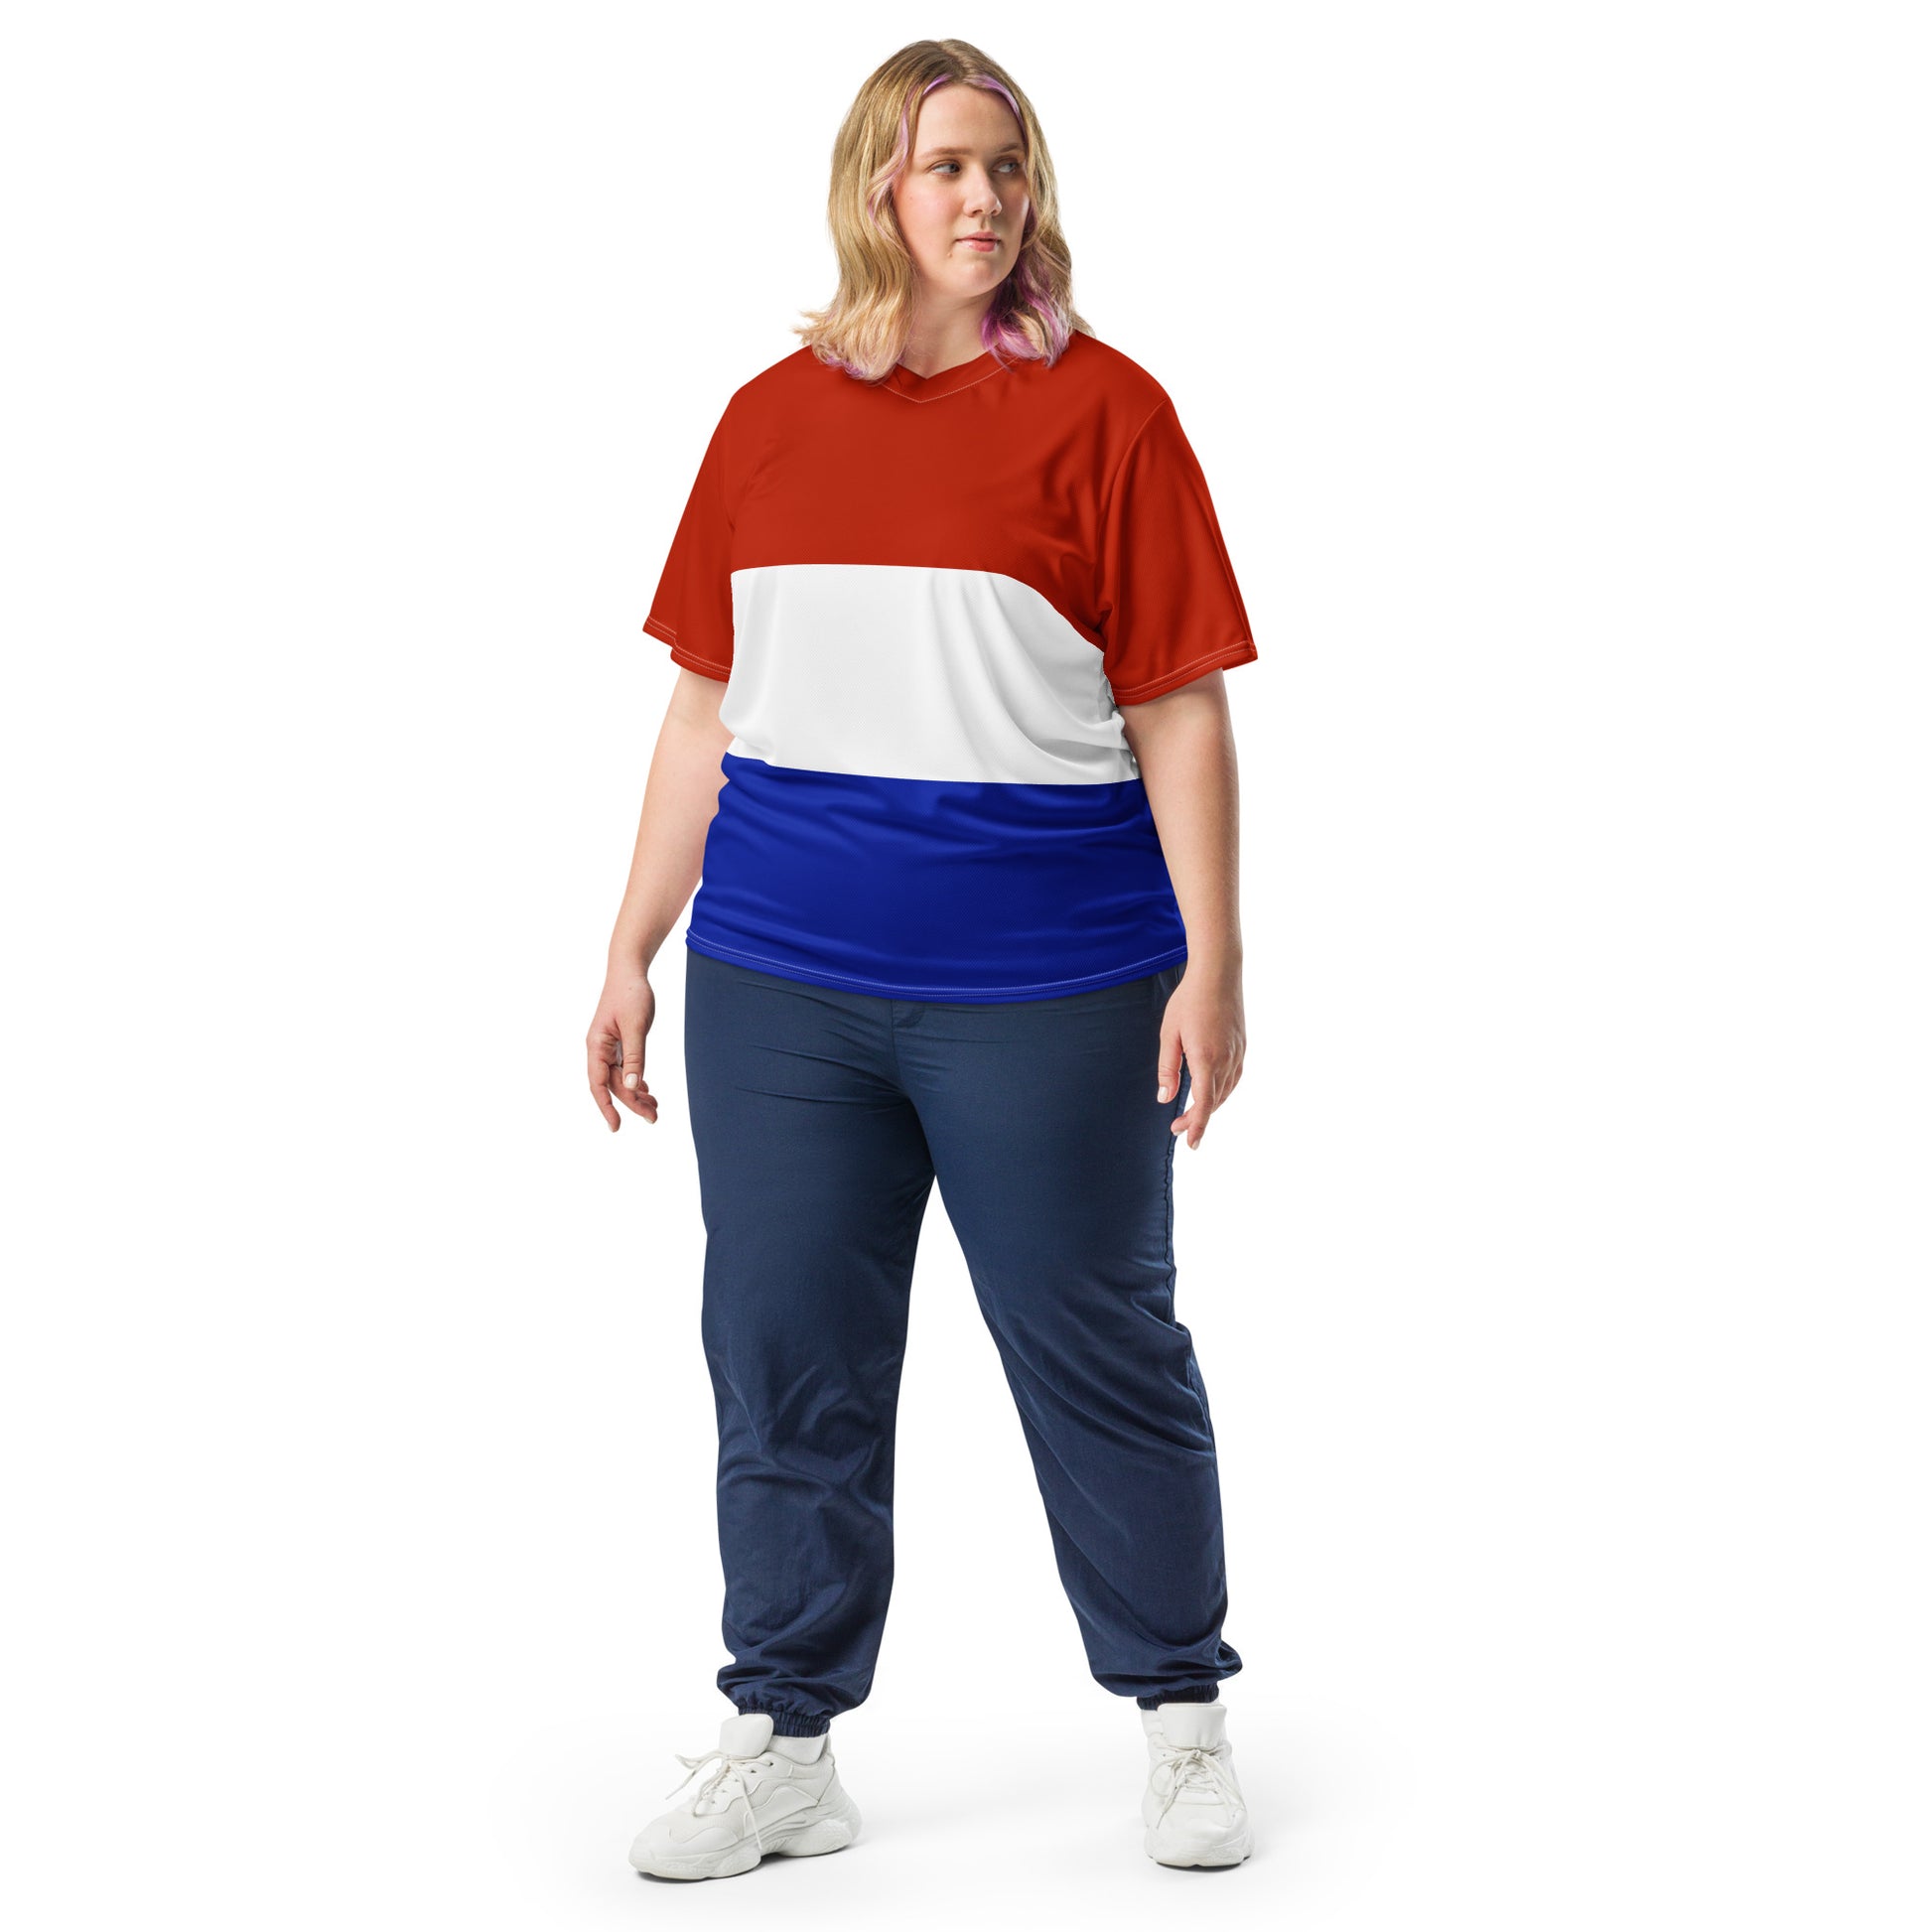 Netherlands Flag T-shirt - Perfect for showing support at sporting events (red, white, blue)